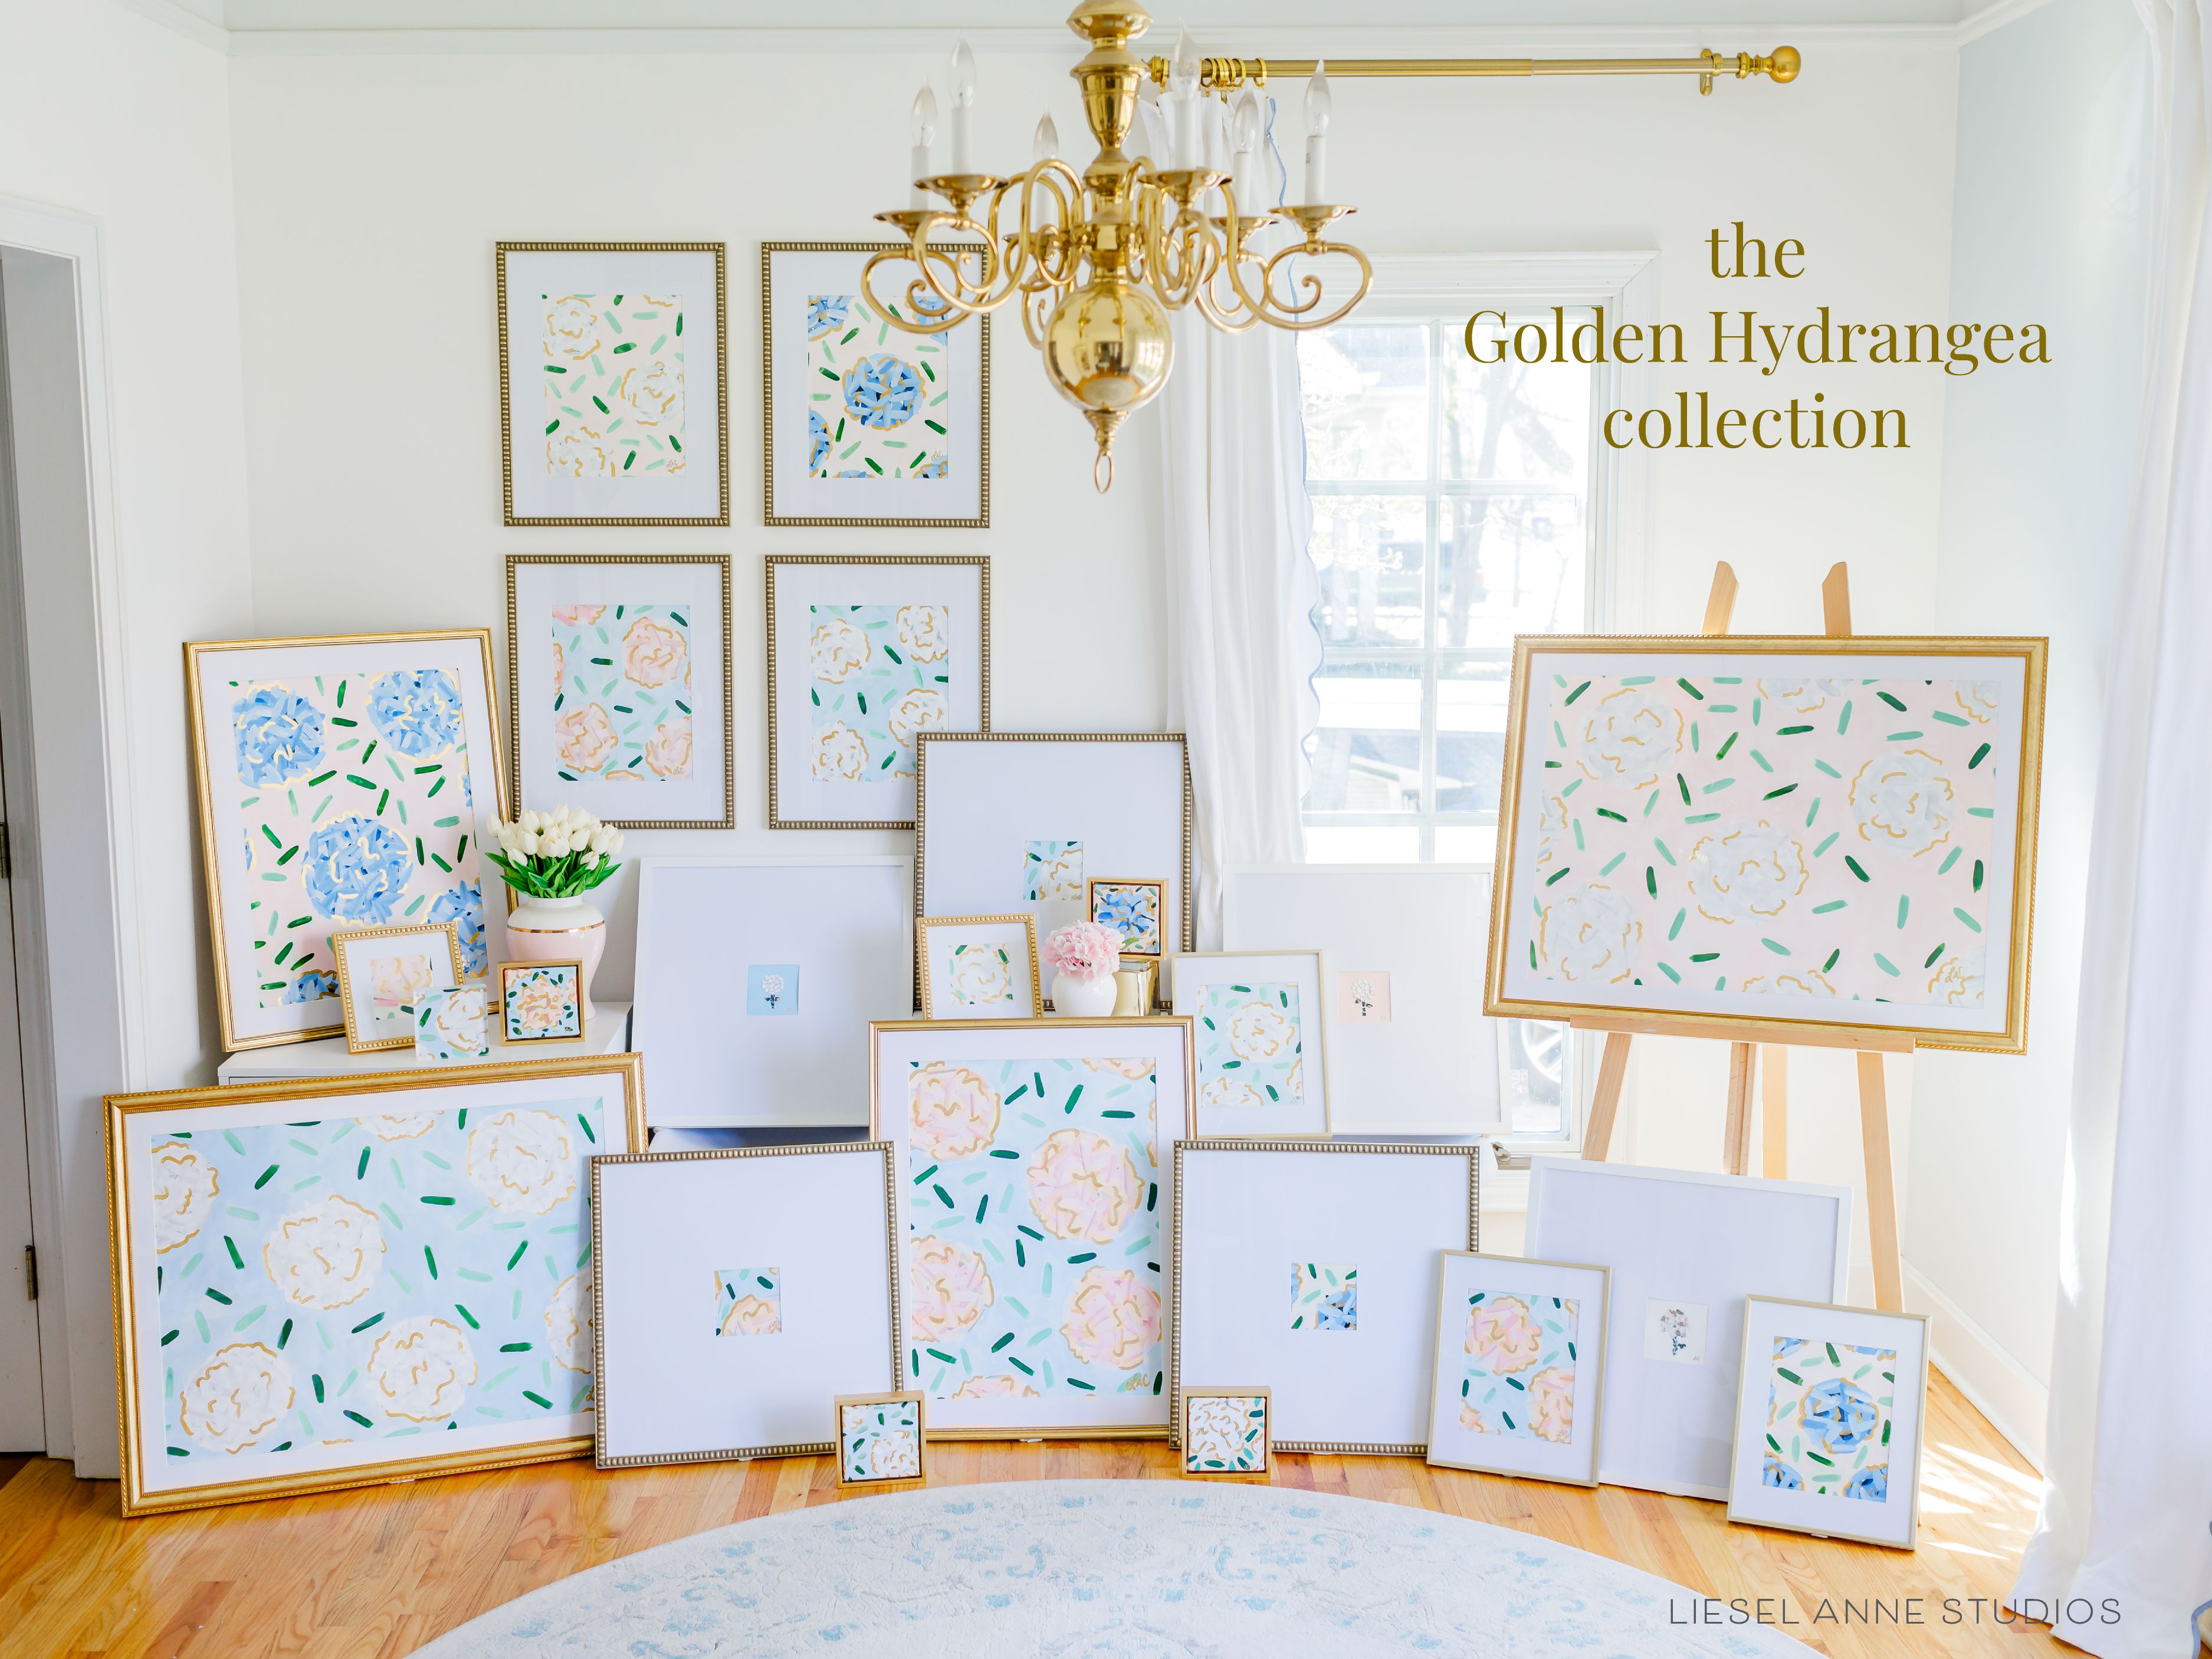 Golden Hydrangea Mini | Blue & White XXI-Original artwork measures 5"x5" | Hand-Painted with gouache on cold press watercolor paper | Matted and framed in gold wood frame sized 20"x20" | Glare-resistant glass | Hanging hardware included | Features our signature Golden Hydrangea design with a light blue base, white hydrangeas and shimmery gold accents | Initialed in gold by the Liesel Anne (the artist) on the front and signed and dated on the back.-The Singing Little Bird